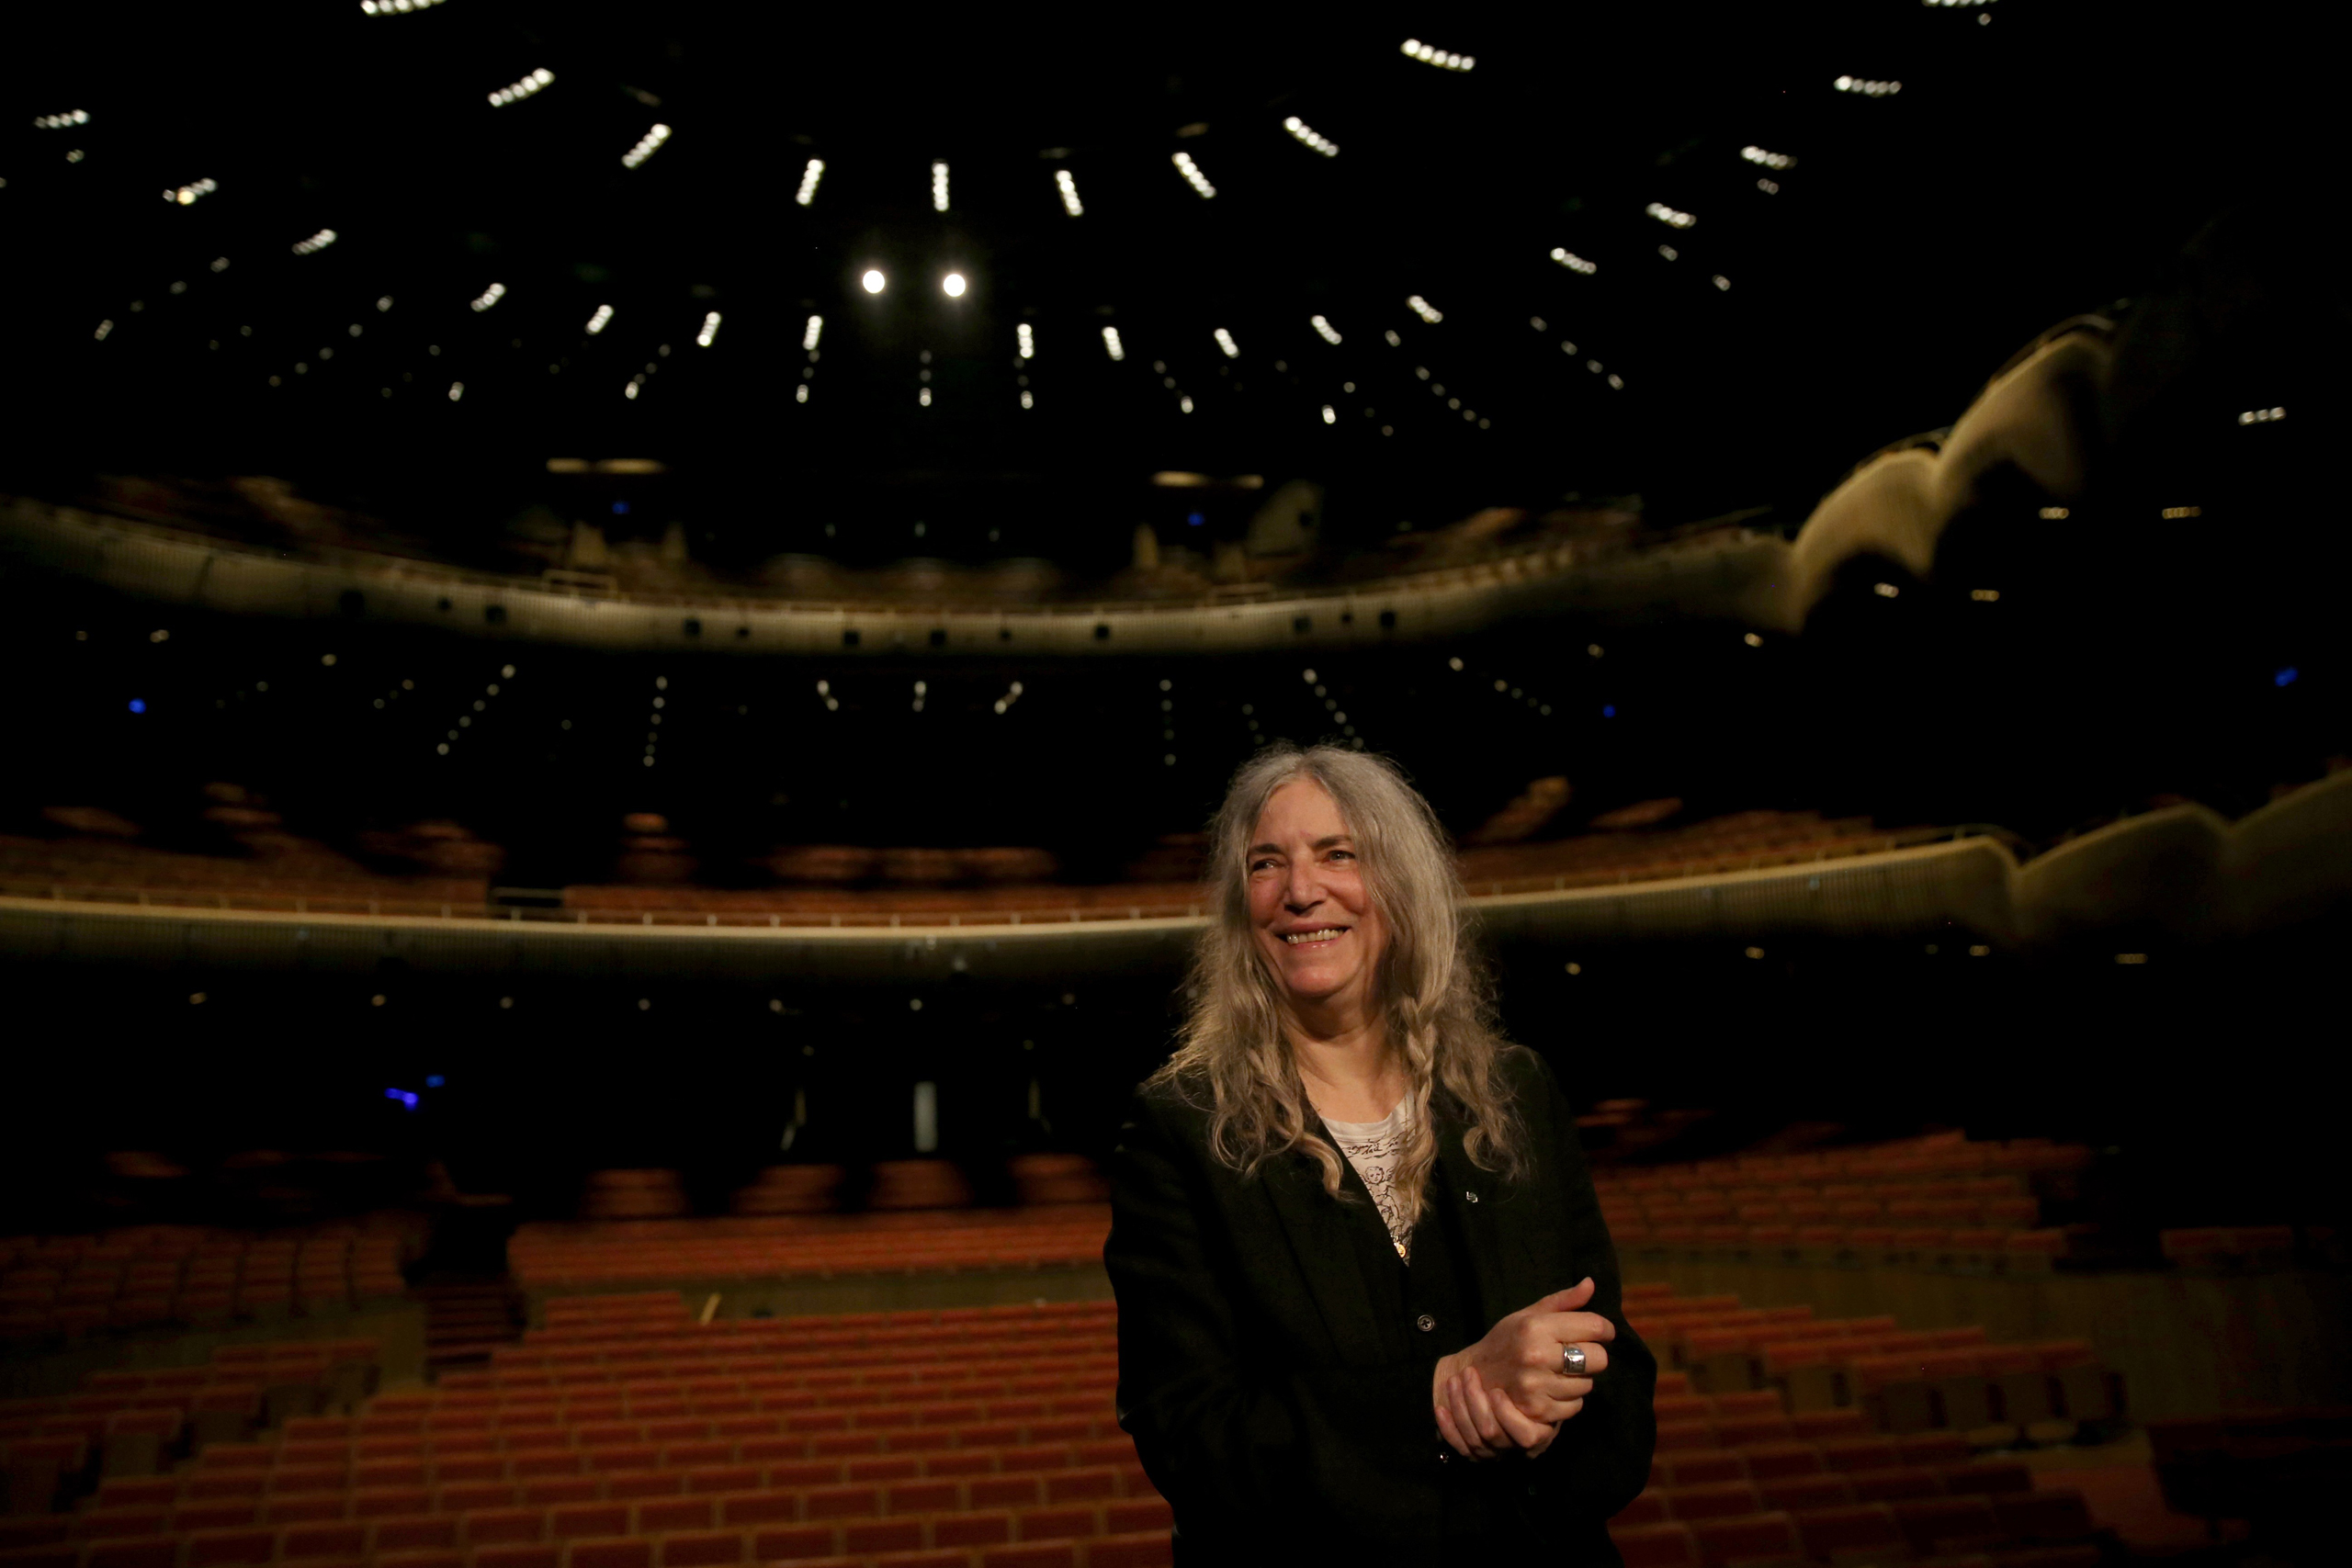 Patti Smith will be singing in Bob Dylan's stead. (Veli Gurgah, Anadolu Agency/Getty Images)